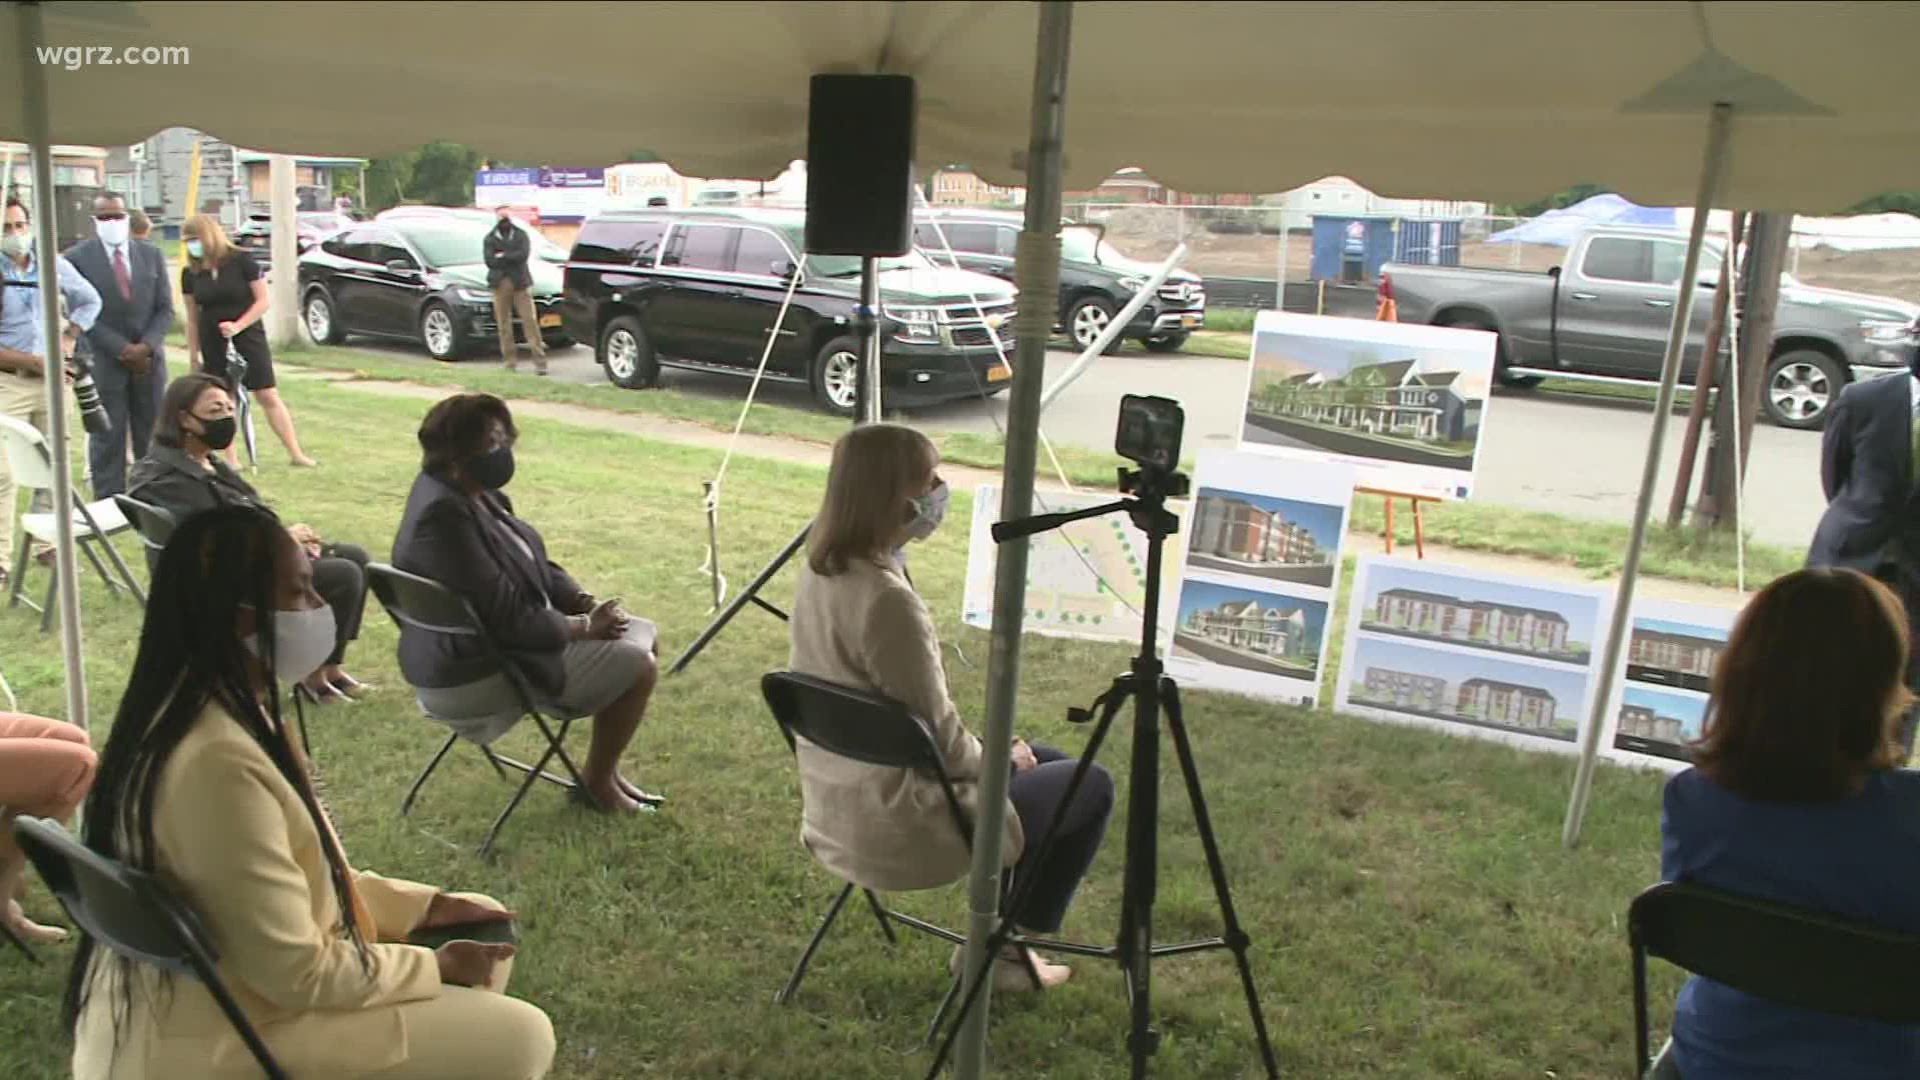 Tuesday morning's event marked the start of construction for Mt. Aaron Village.